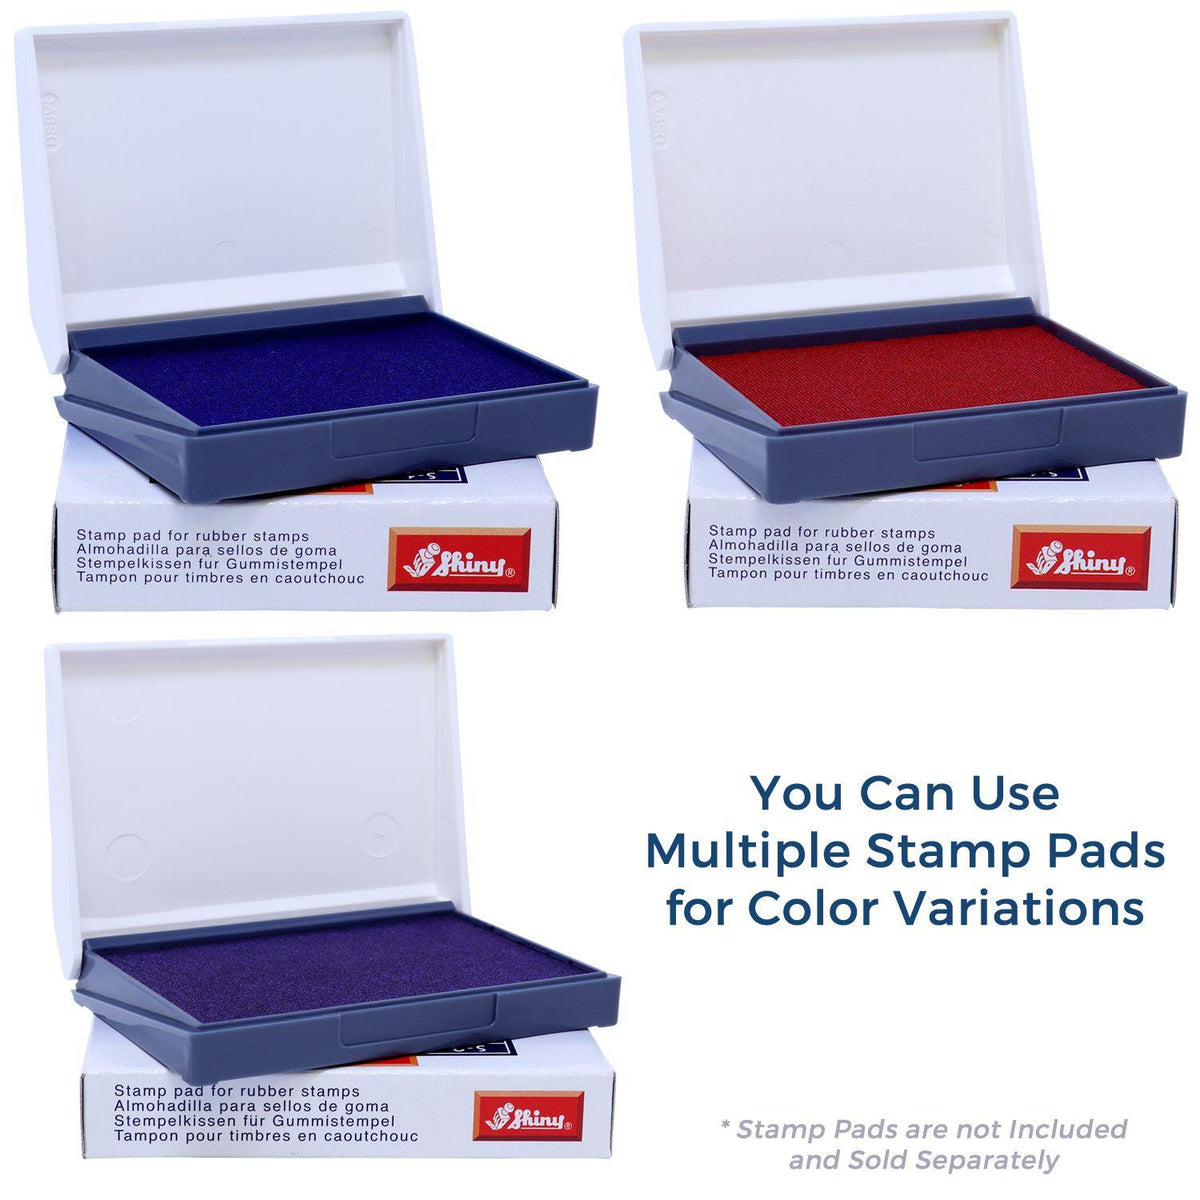 Stamp Pads for Large First Class Mail International Rubber Stamp Available